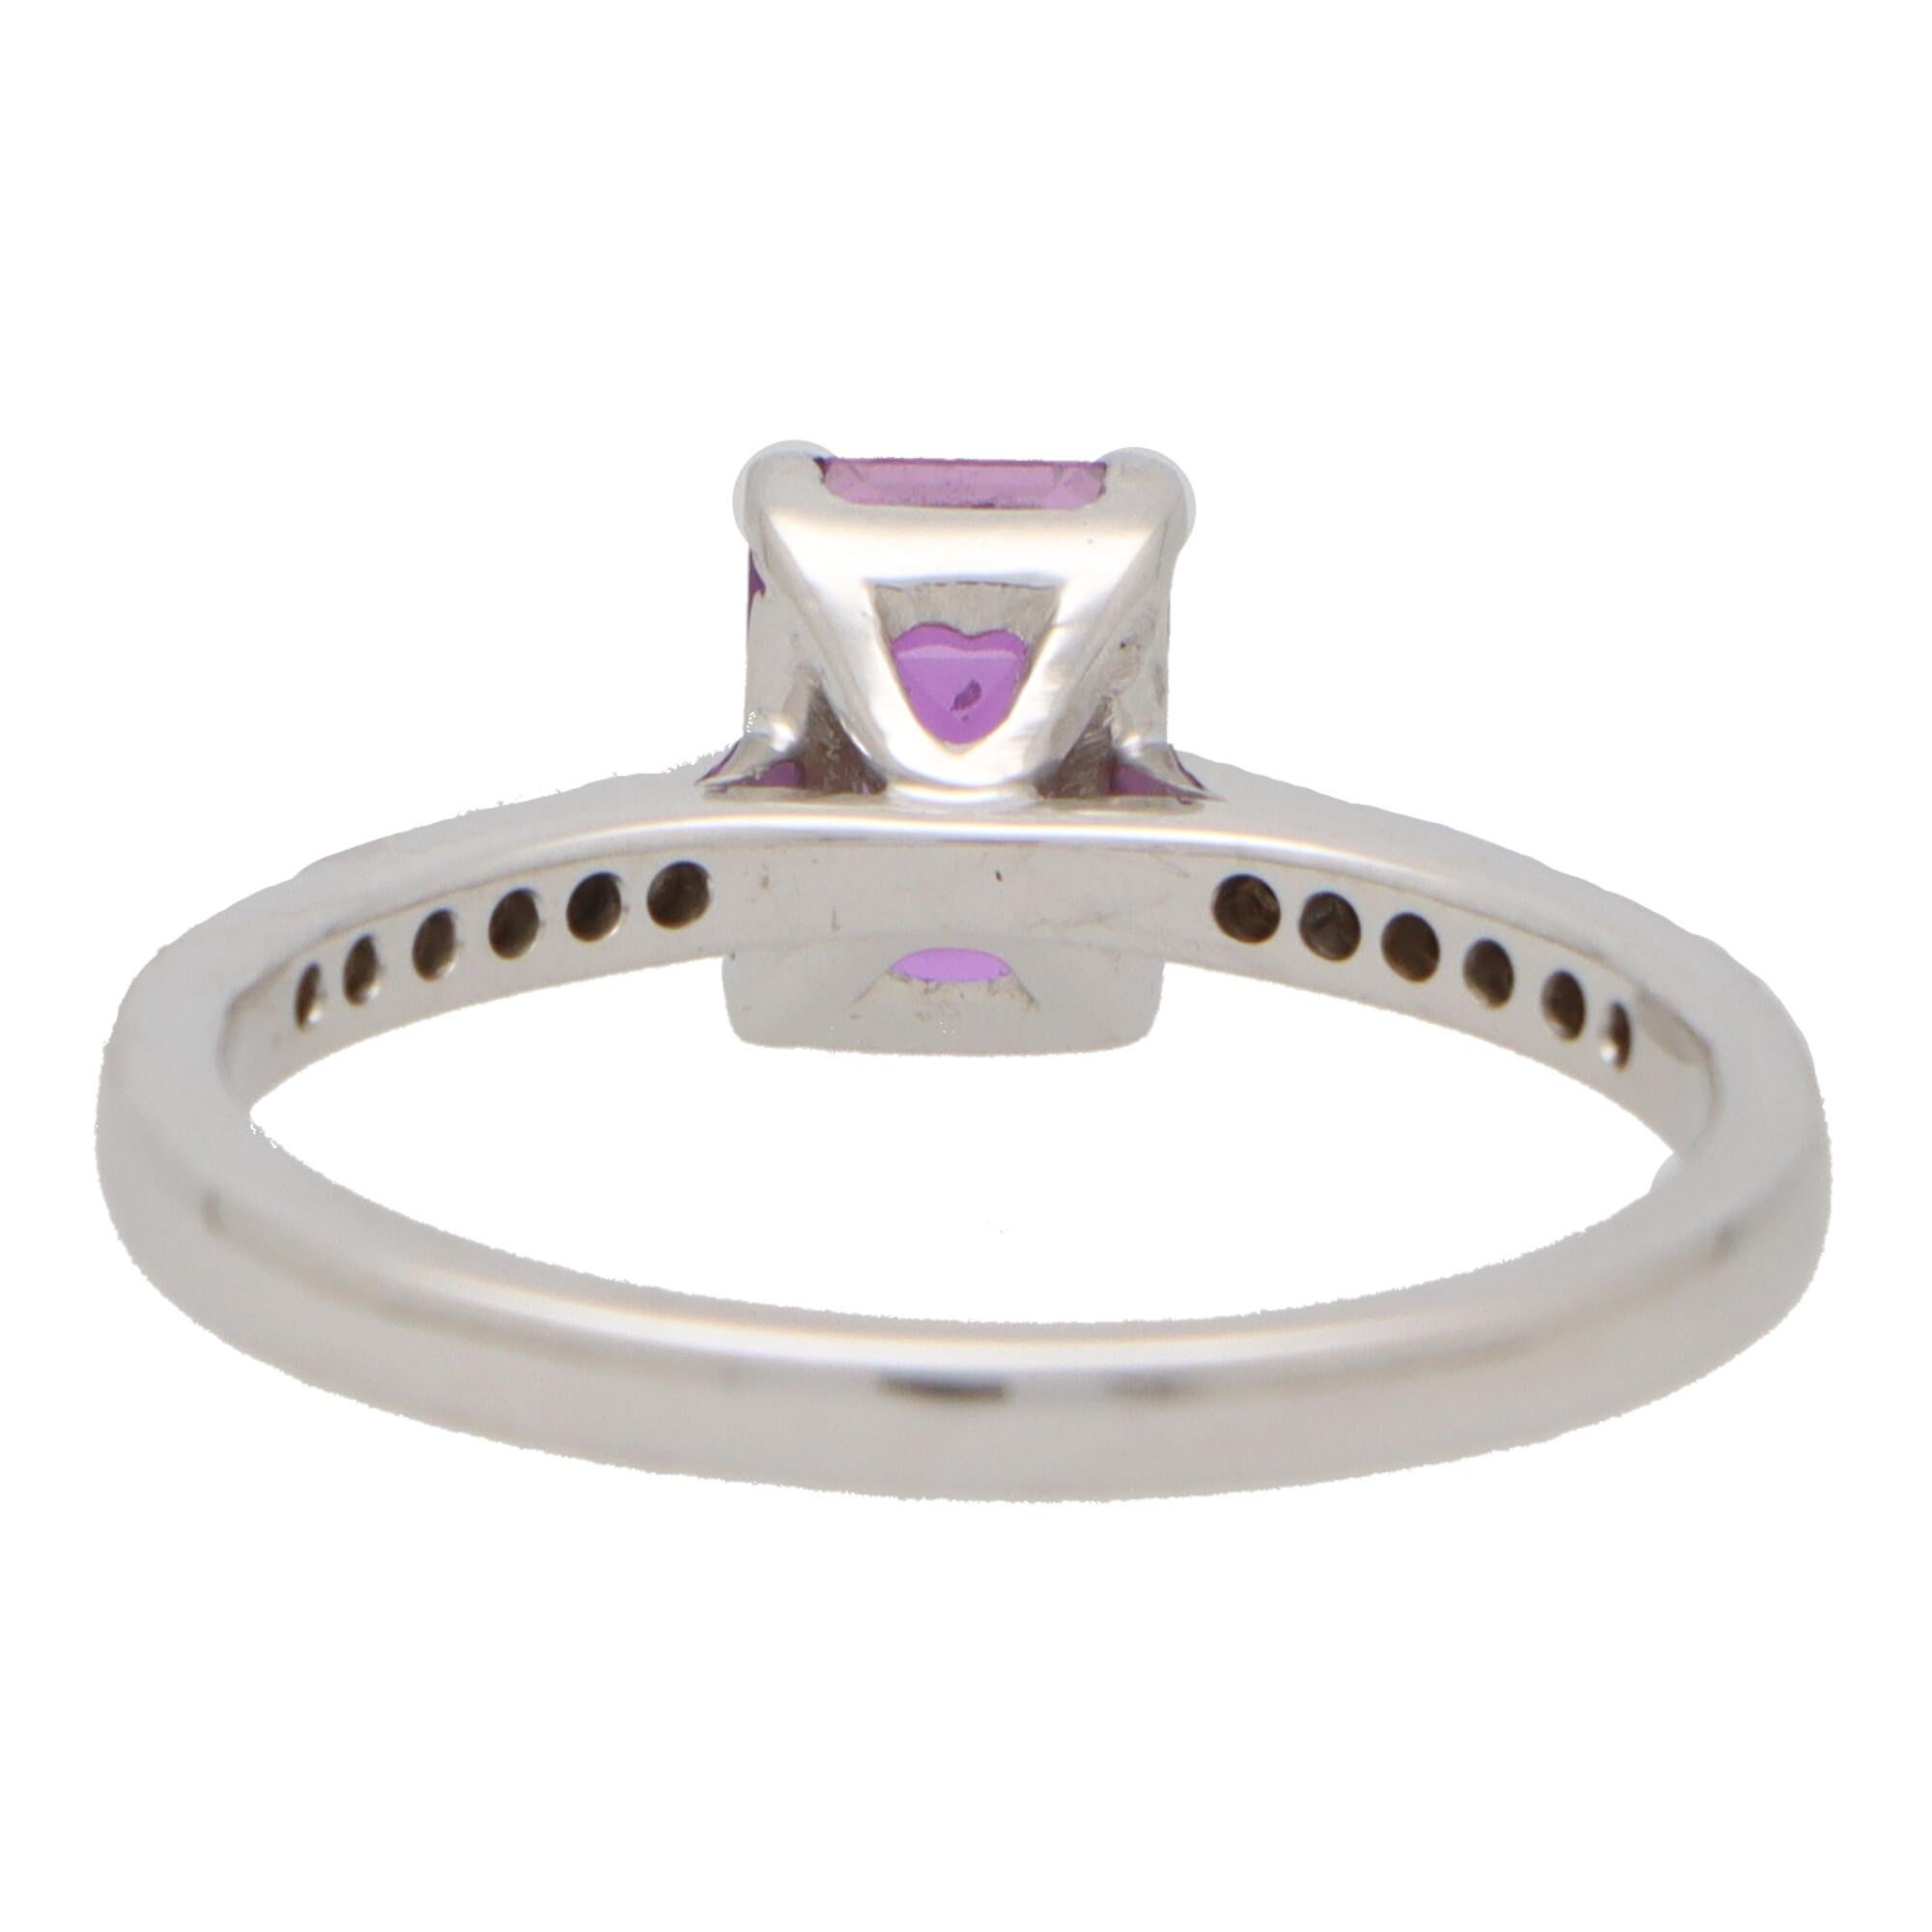 Emerald Cut Purple Sapphire and Diamond Solitaire Ring Set in 18k White Gold